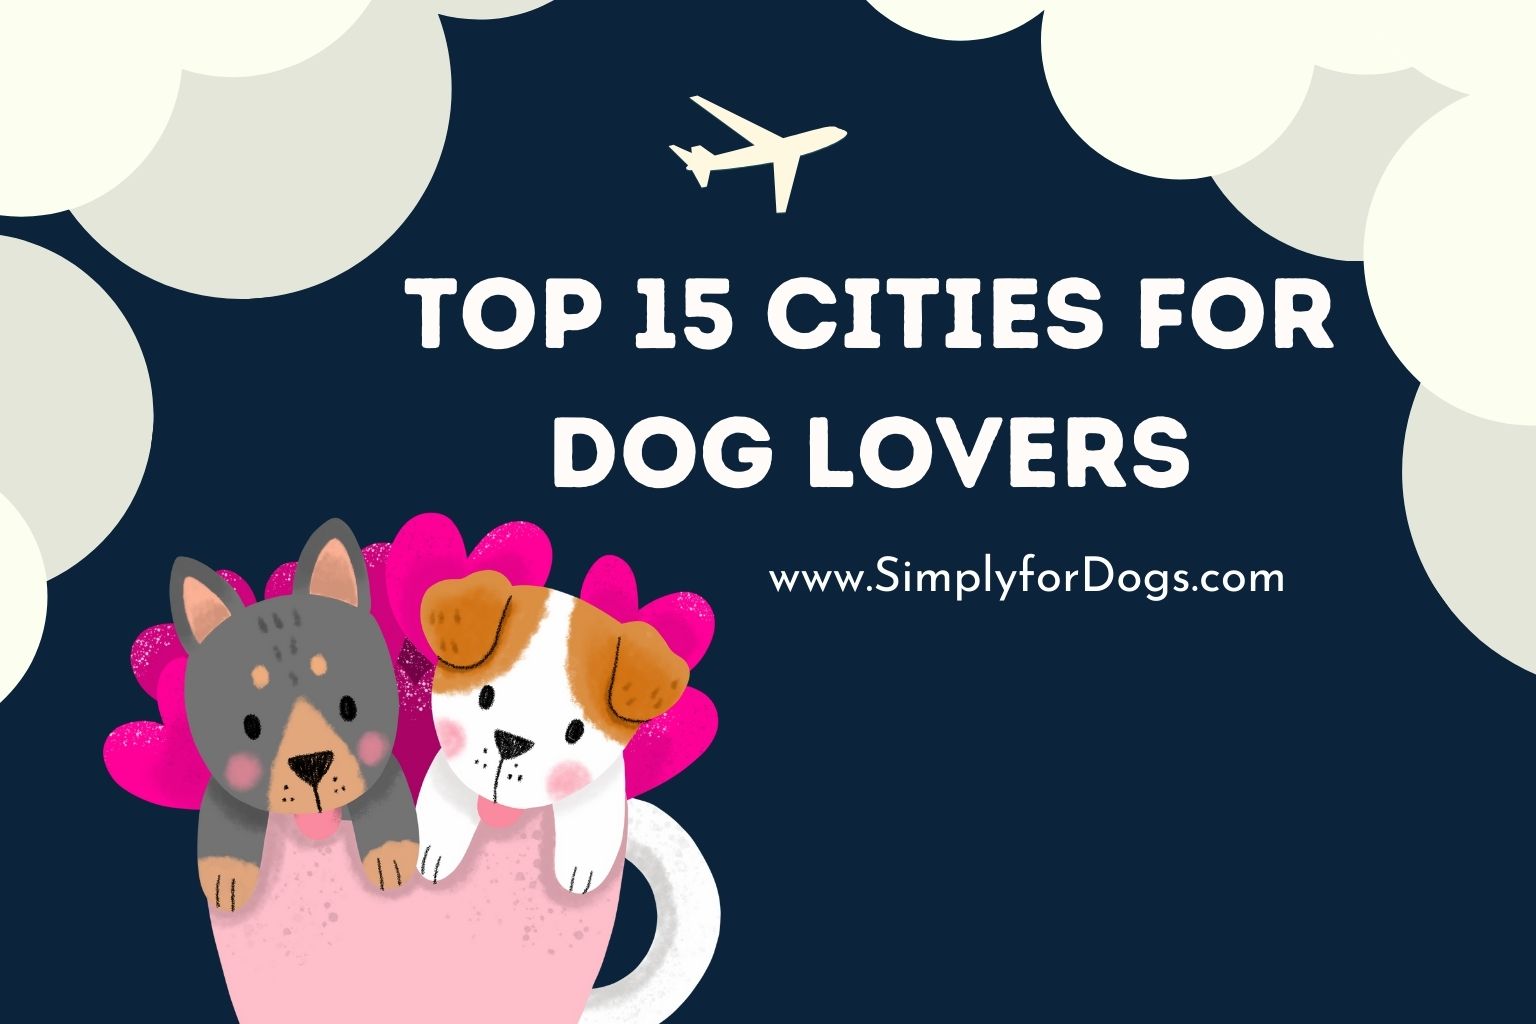 Top 15 Cities for Dog Lovers